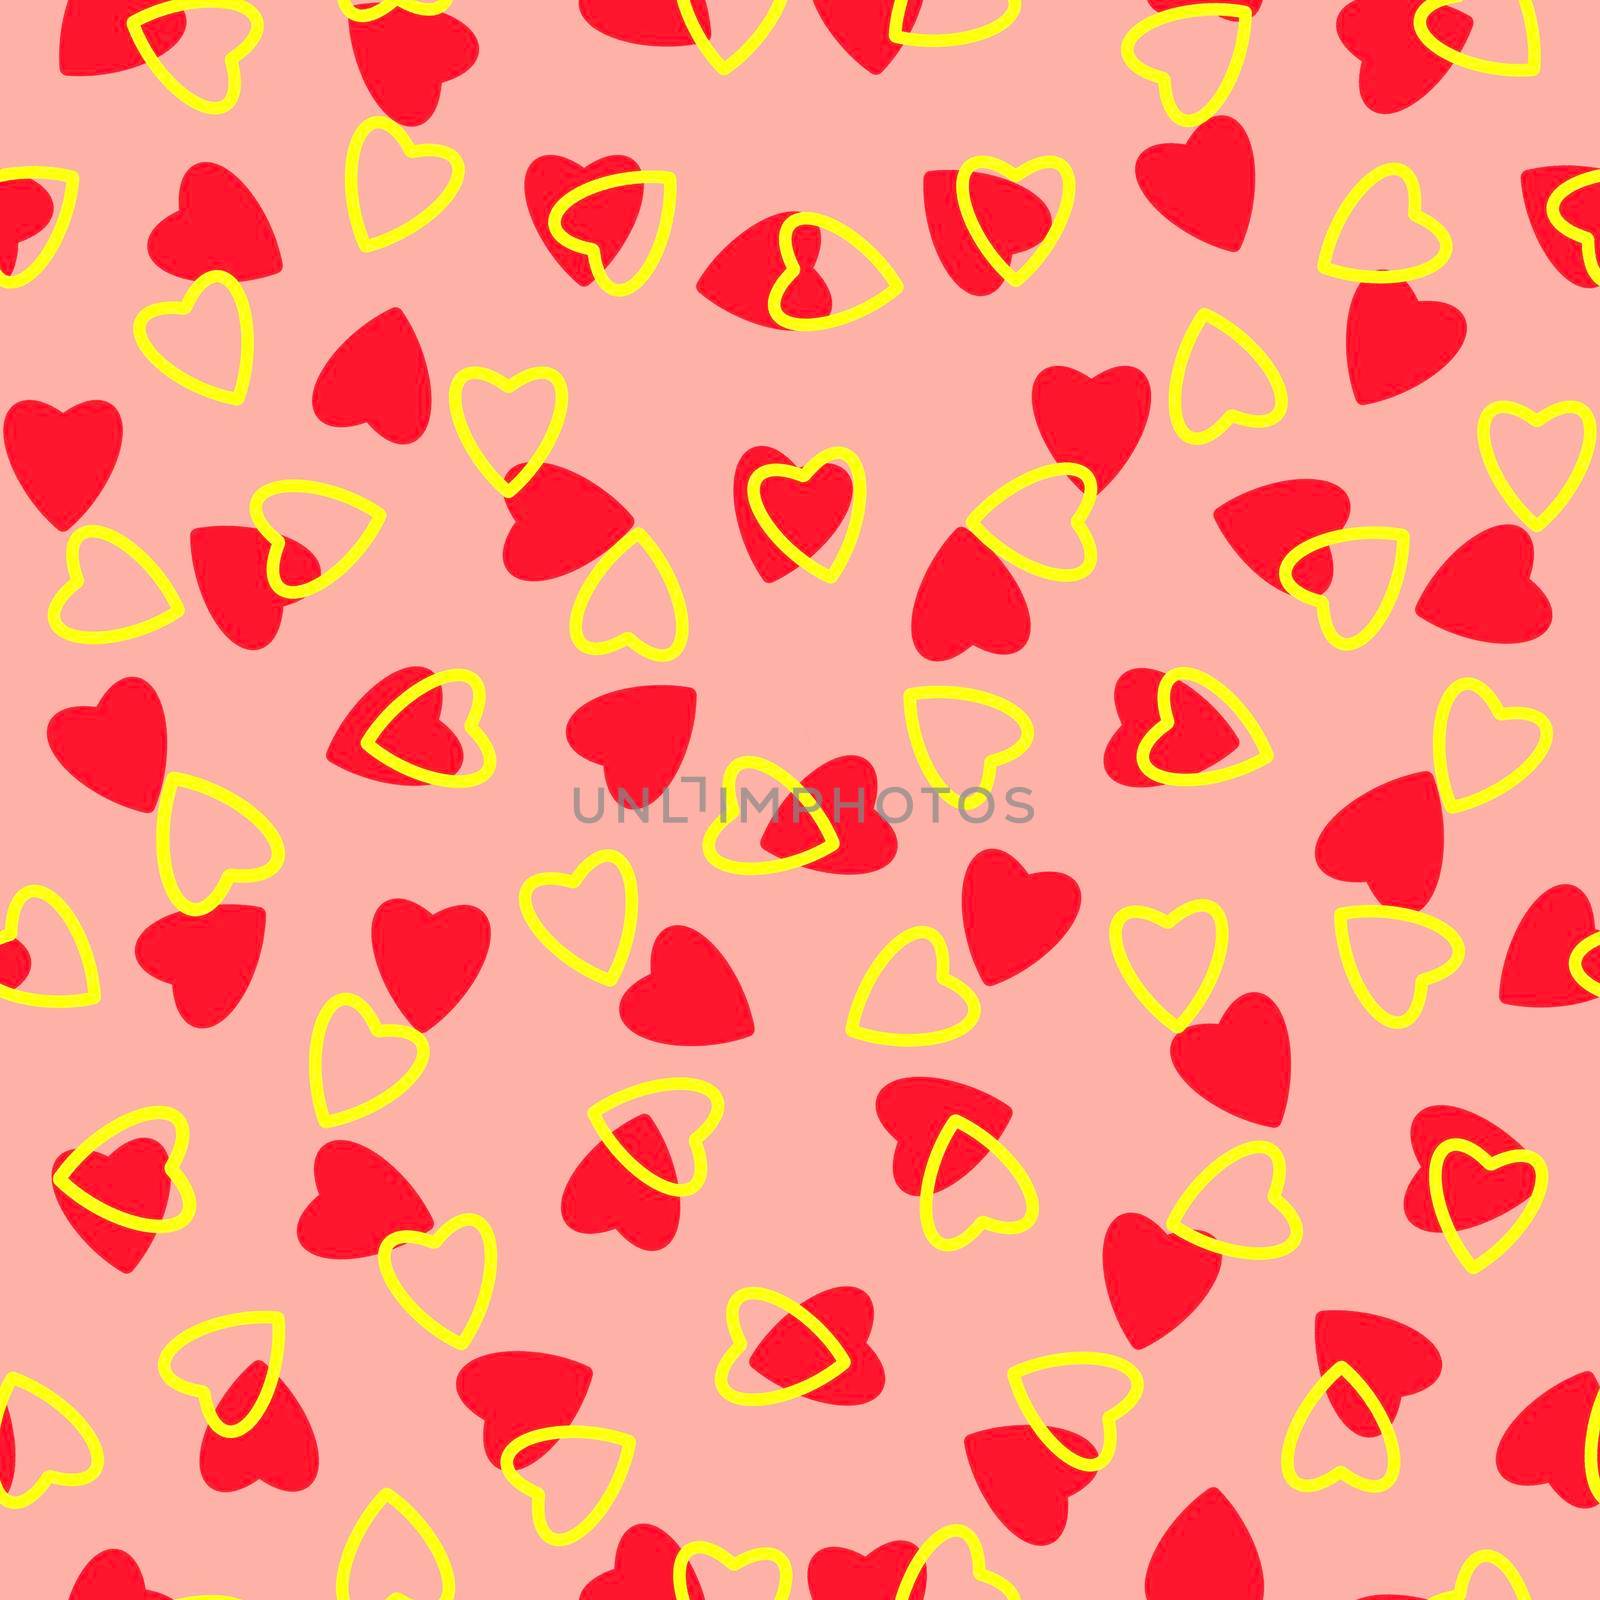 Simple hearts seamless pattern,endless chaotic texture made of tiny heart silhouettes.Valentines,mothers day background.Great for Easter,wedding,scrapbook,gift wrapping paper,textiles.Red,yellow,peach by Angelsmoon